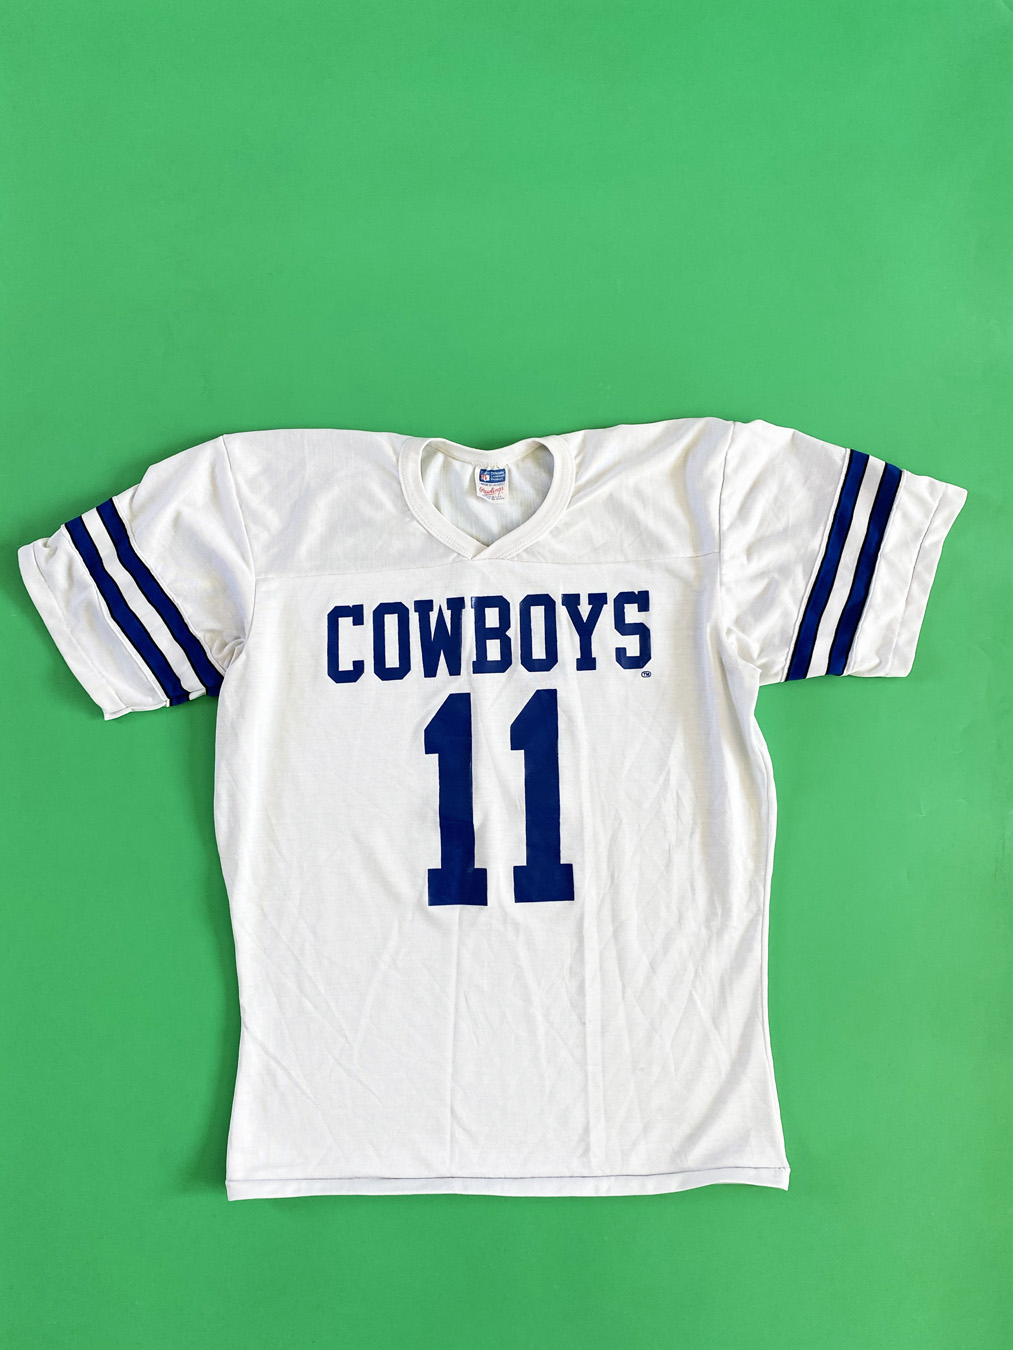 Danny White 1985 Dallas Cowboy Throwback NFL Football Jersey